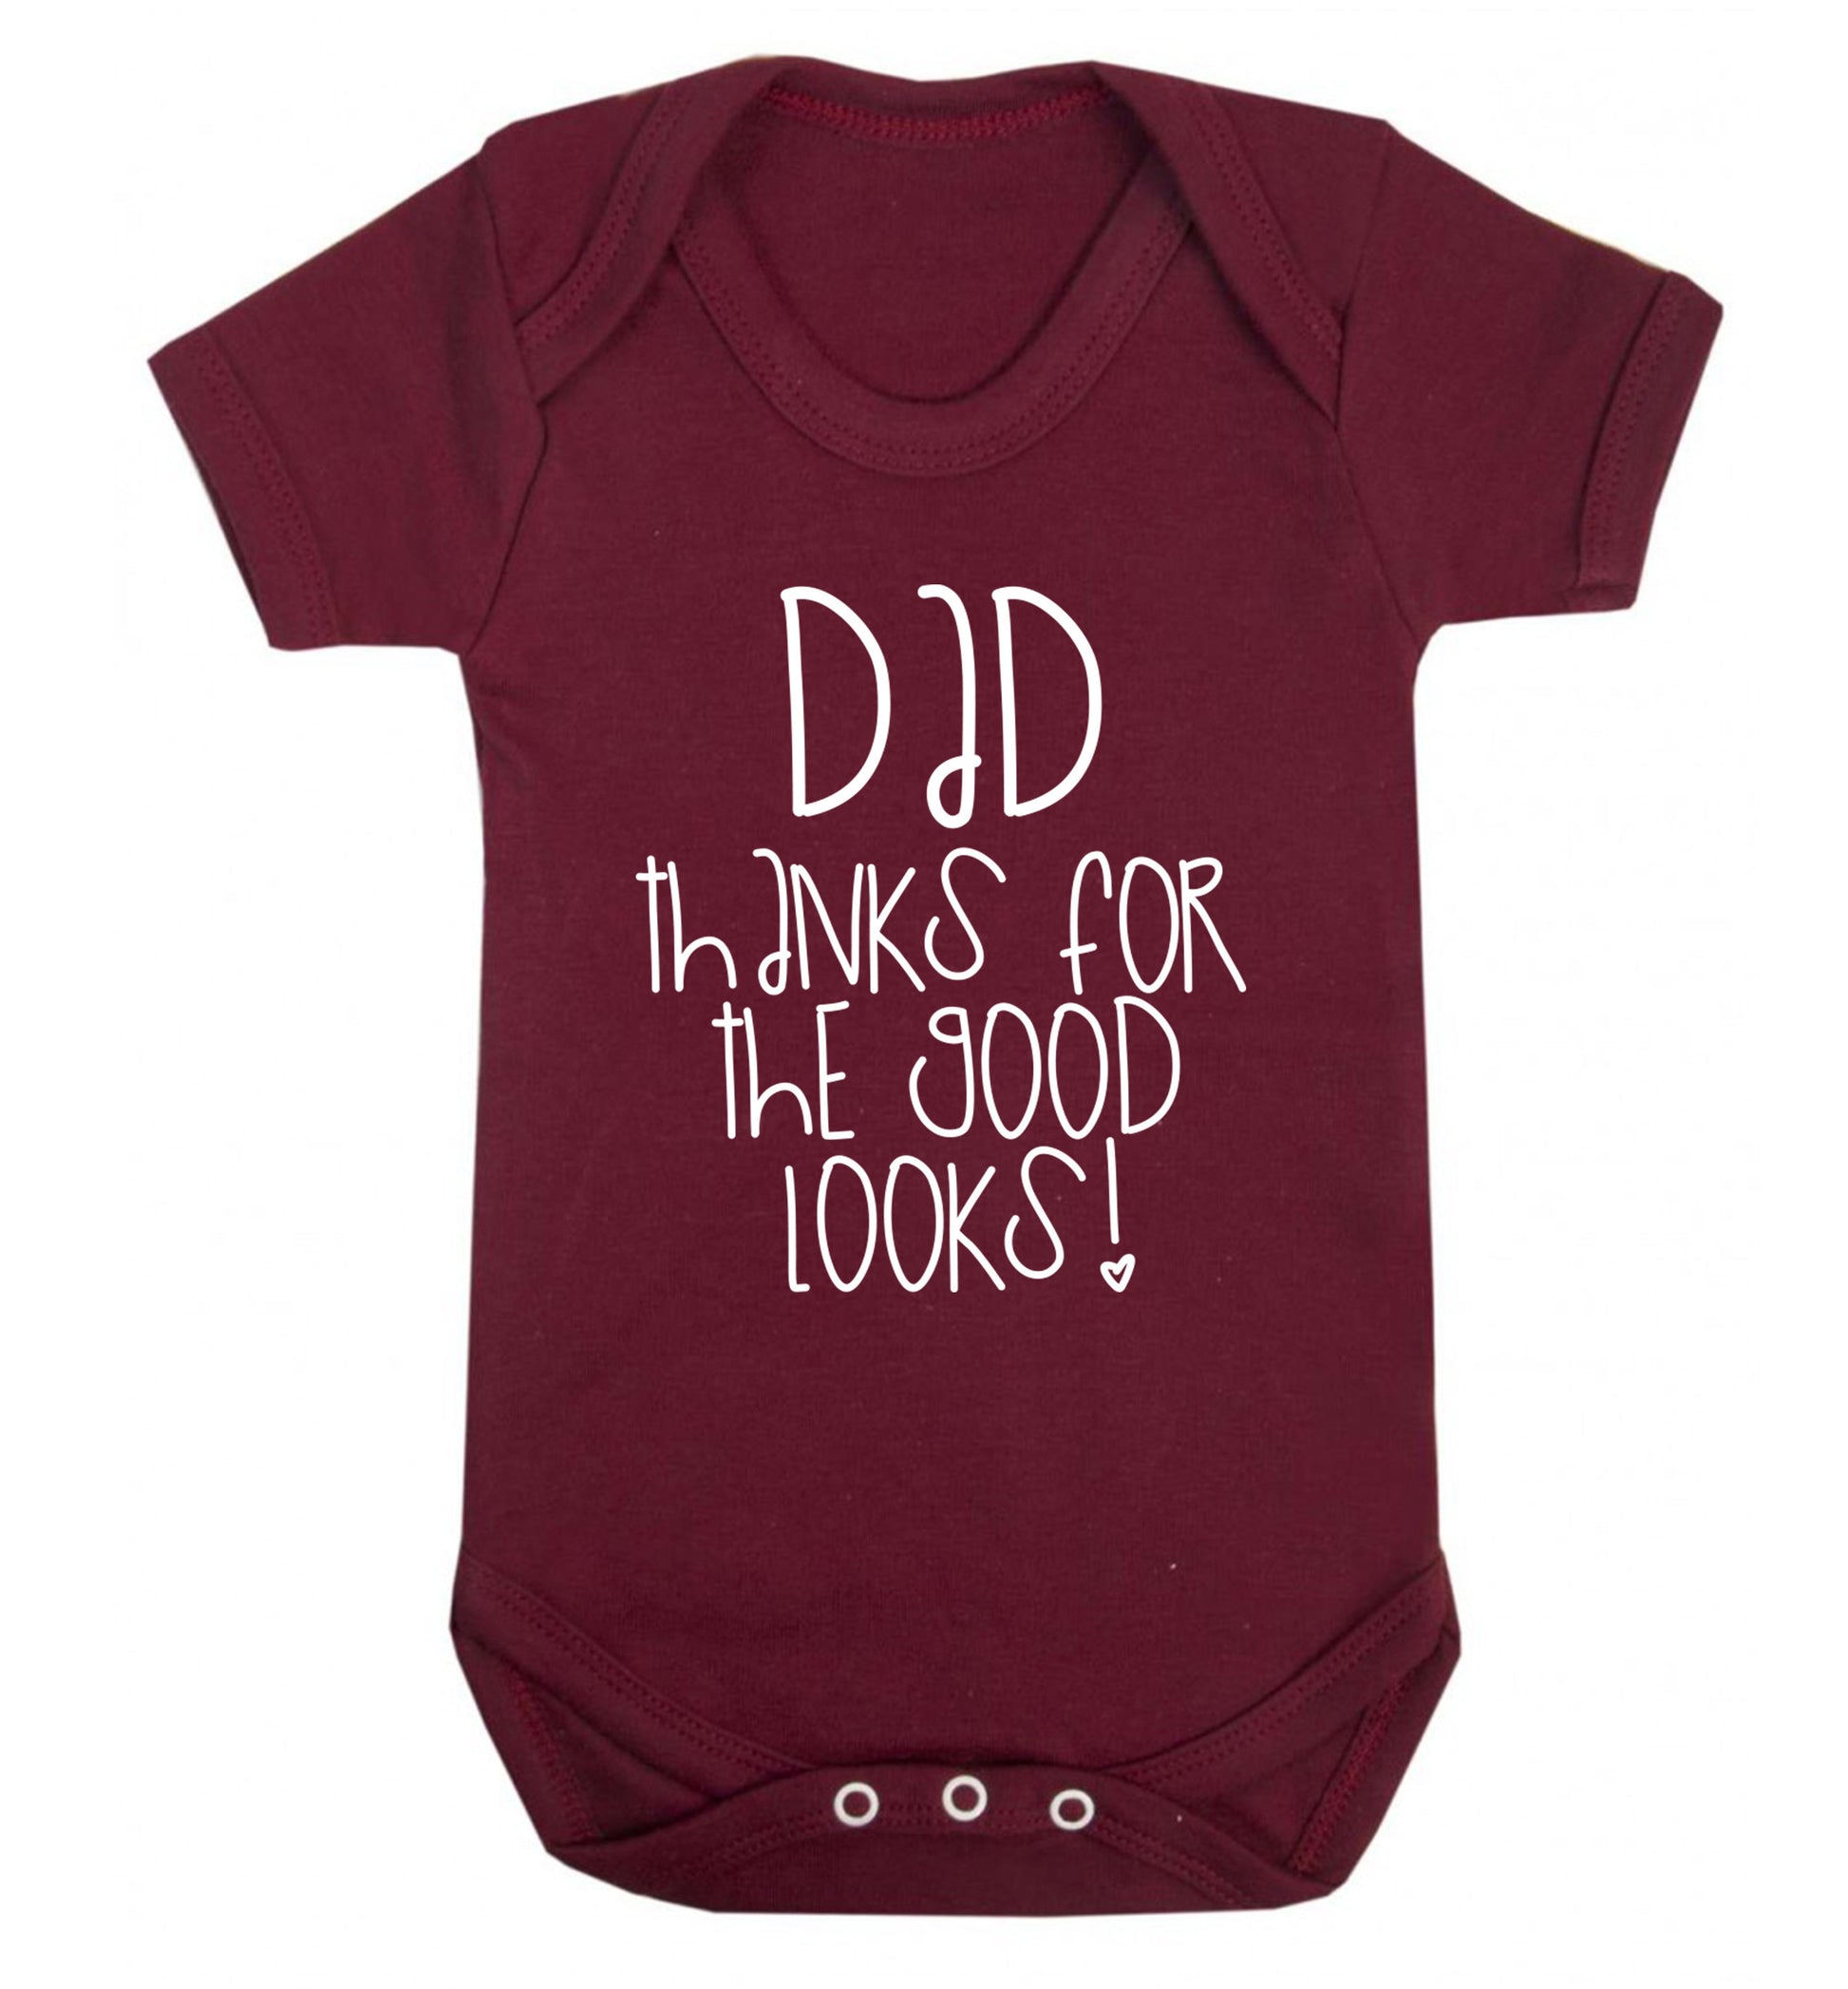 Dad thanks for the good looks Baby Vest maroon 18-24 months